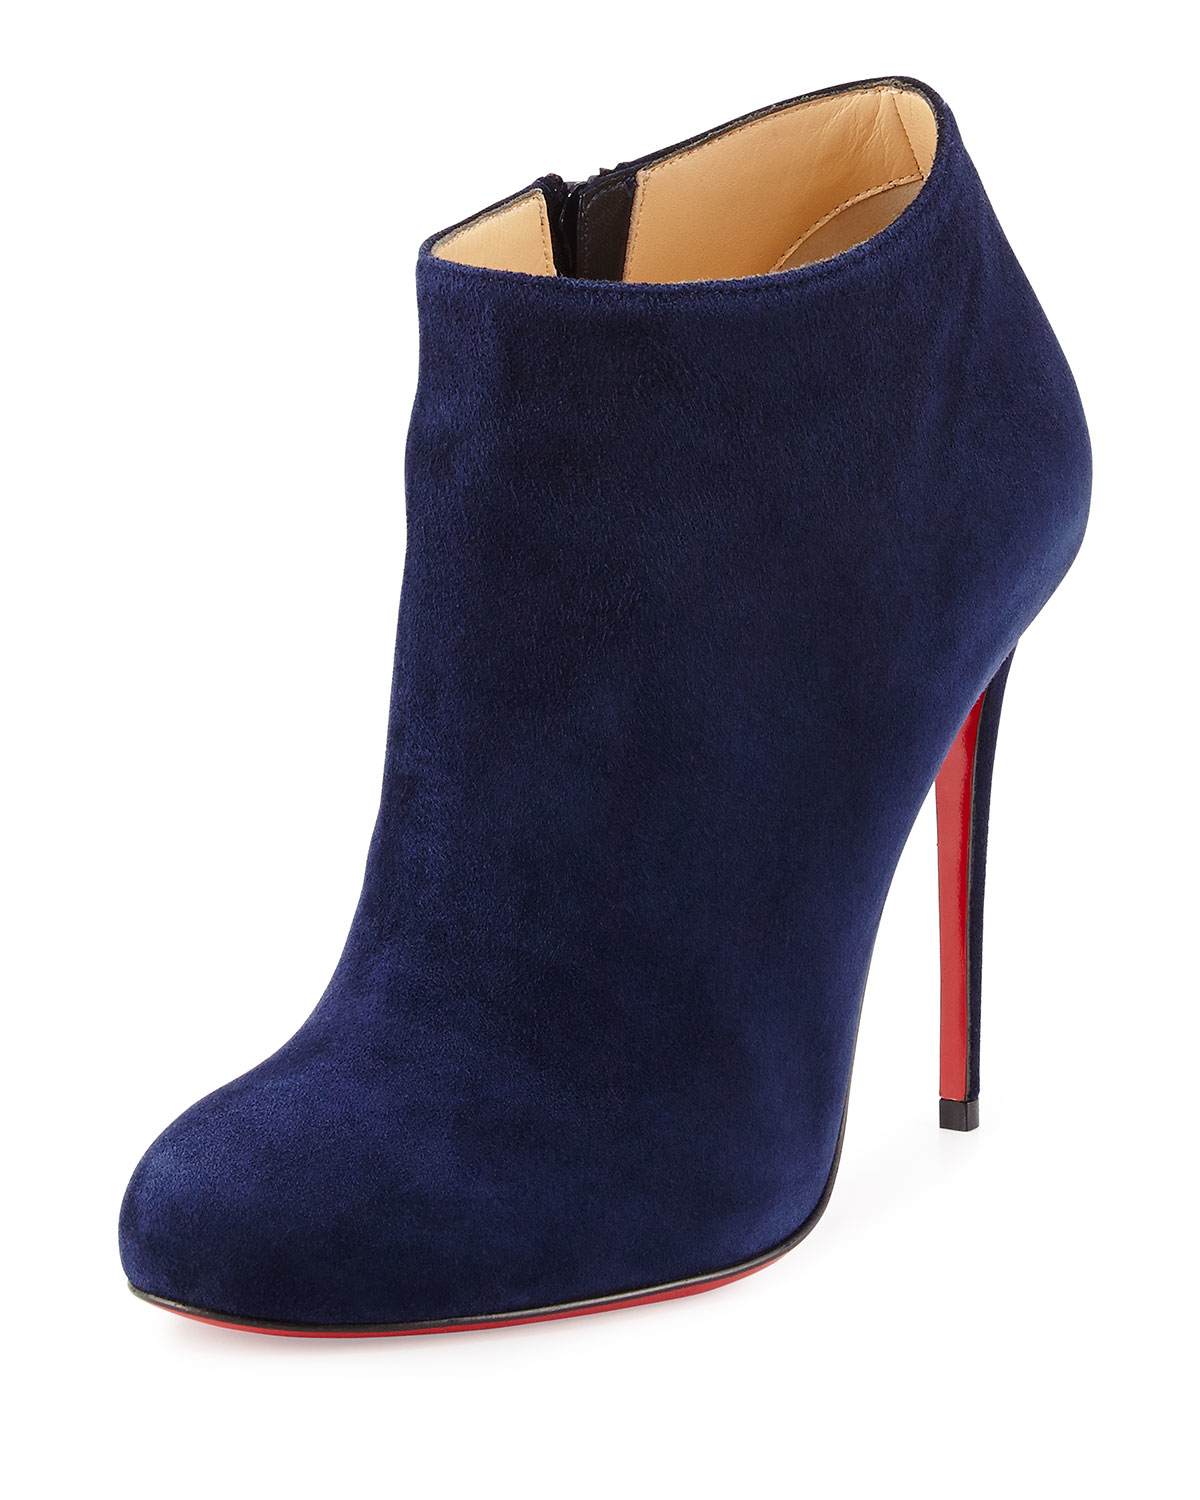 Lyst - Christian Louboutin Bellissima Suede Red Sole Bootie in Blue